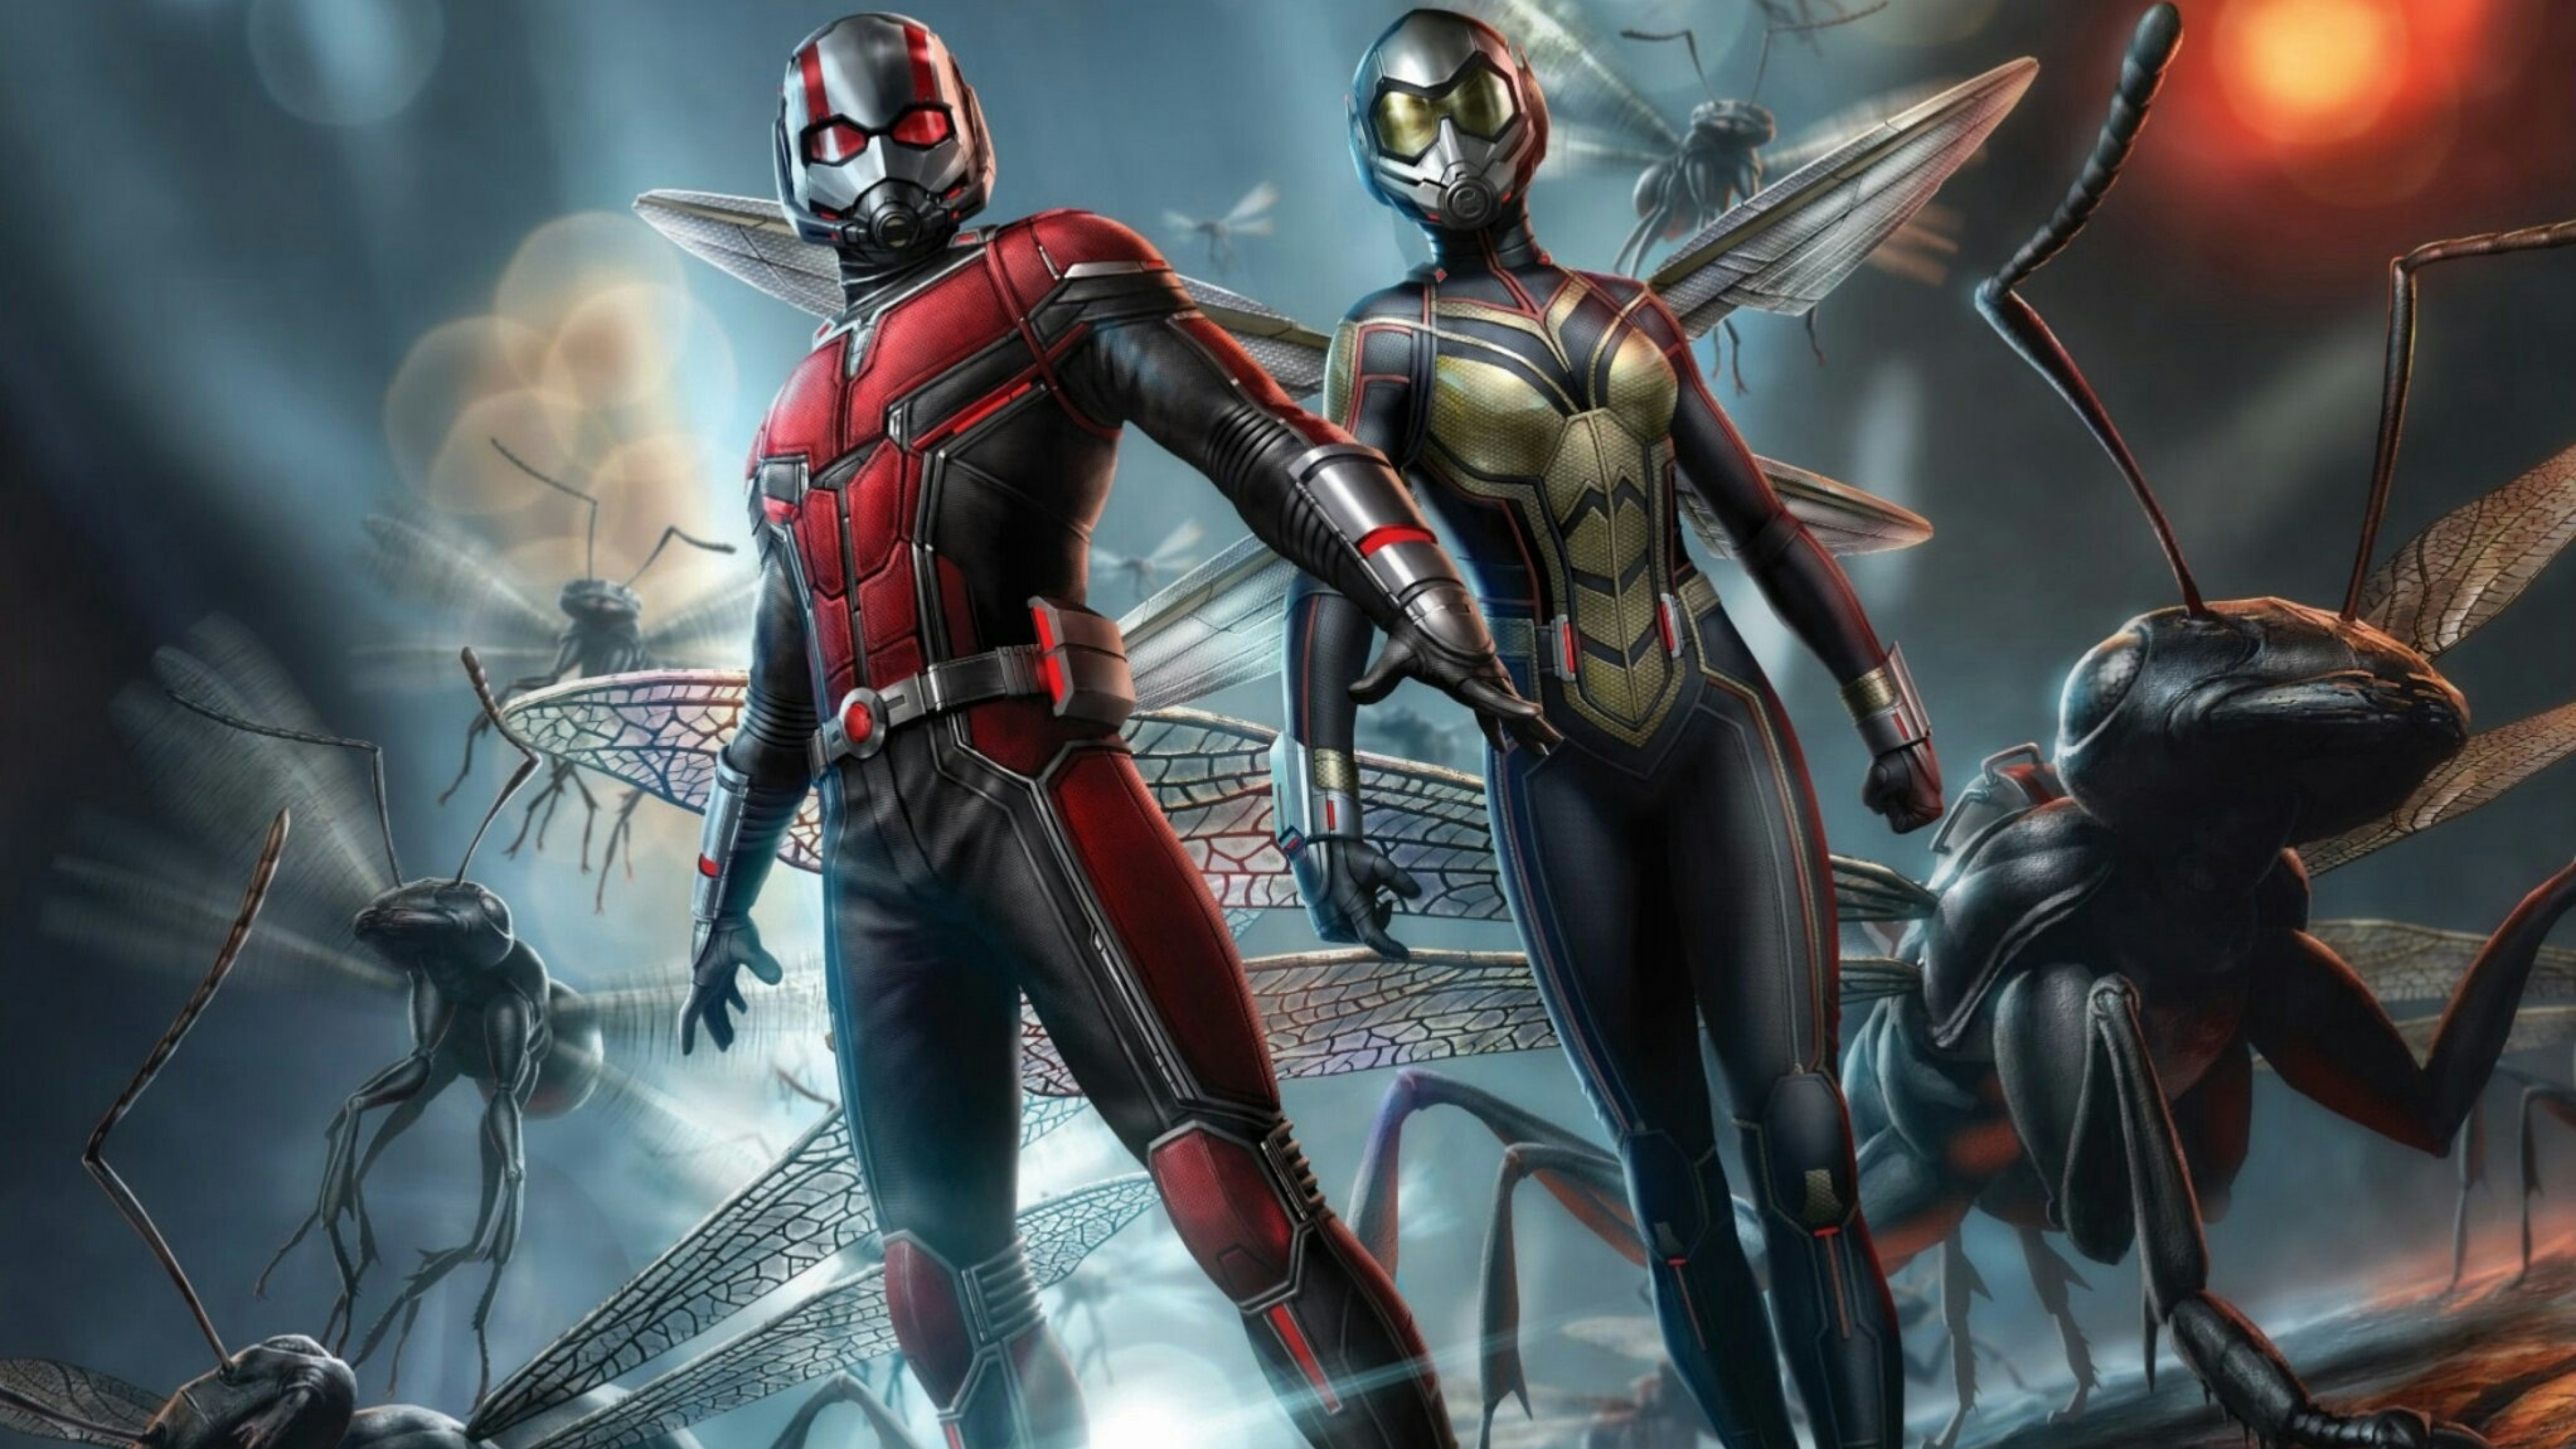 Ant-Man and the Wasp, Artwork wallpapers, 3840x2160 4K Desktop